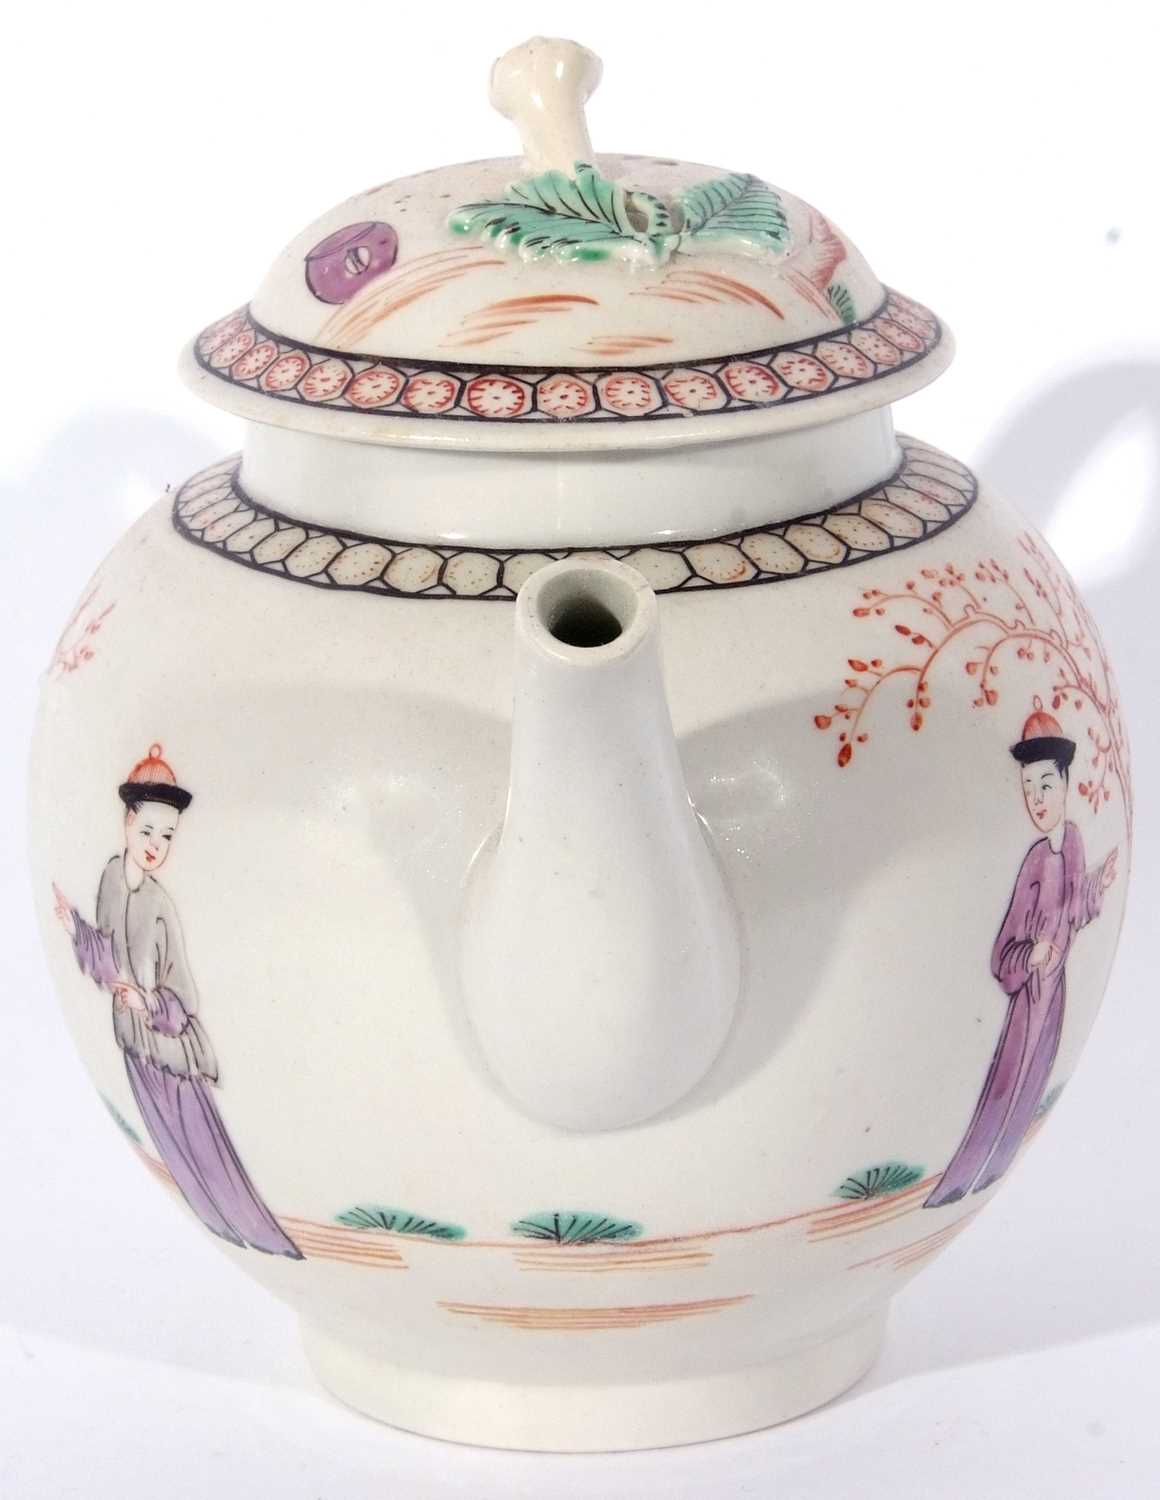 Lowestoft porcelain tea pot, circa 1780, with a polychrome design of Chinese figures by a tree, - Image 7 of 8